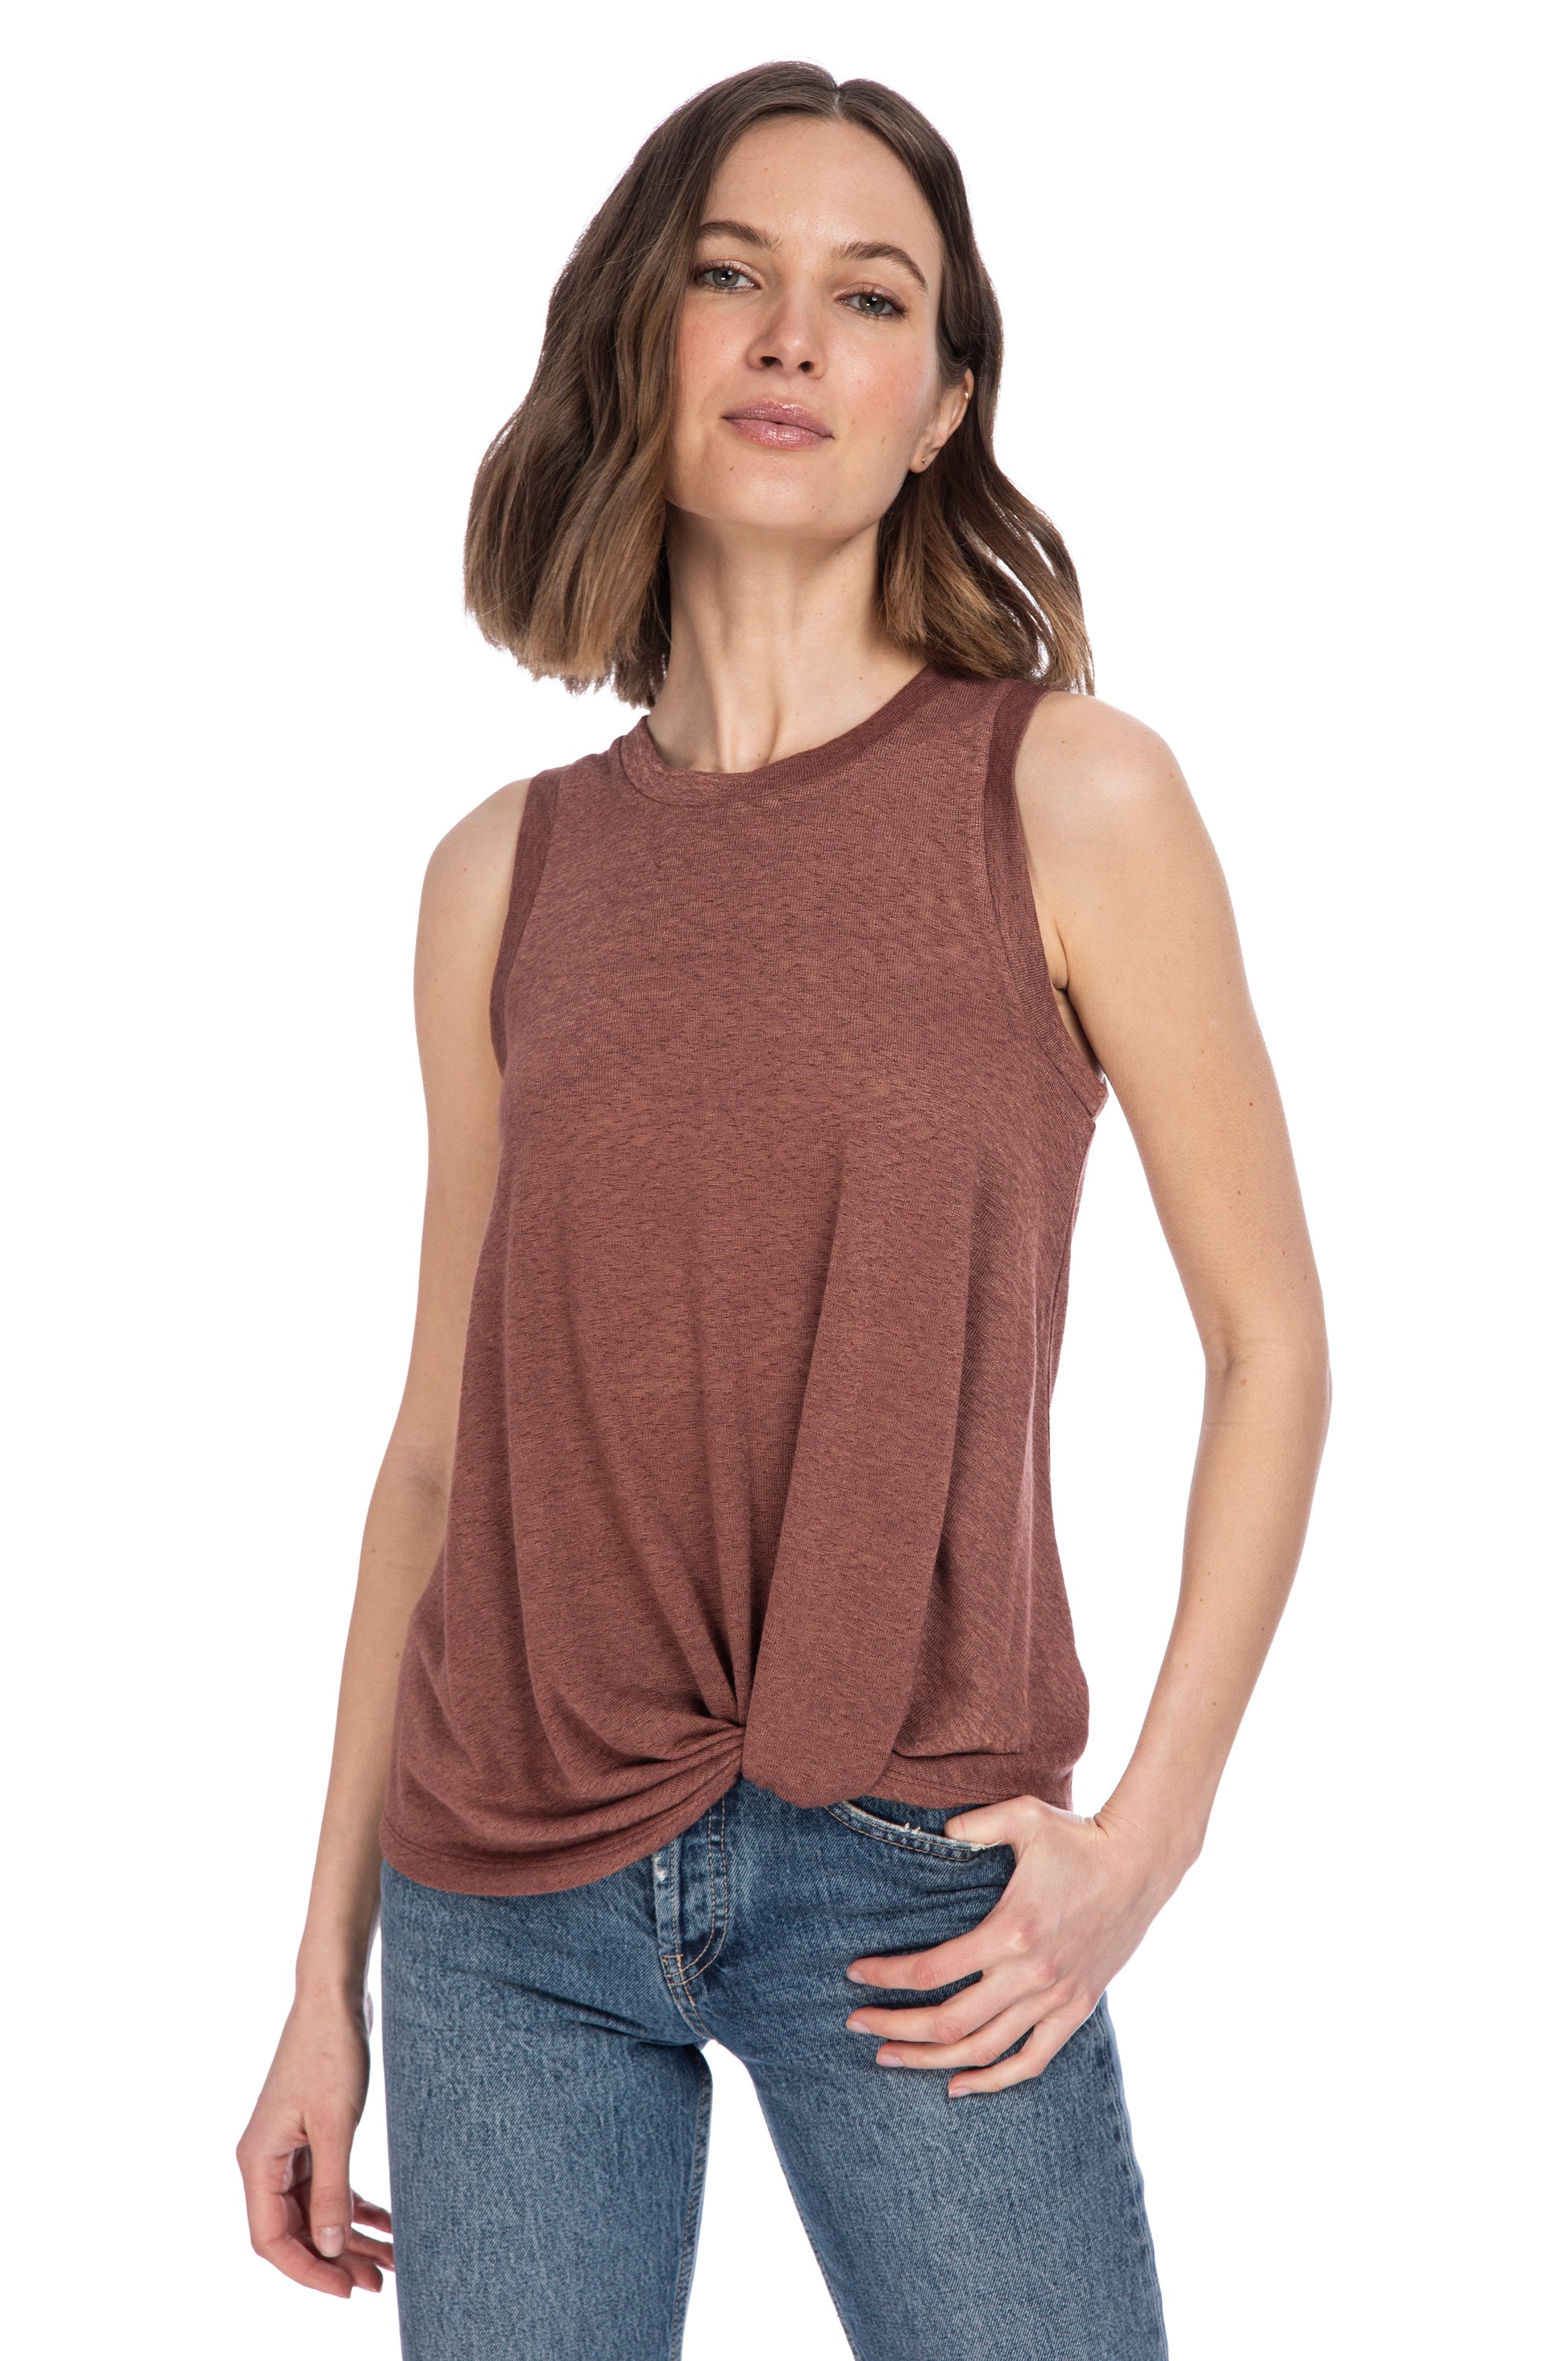 A woman in a B Collection by Bobeau CATY TWIST HEM CREW knit top with a twist hem and blue jeans posing with one hand in her pocket.